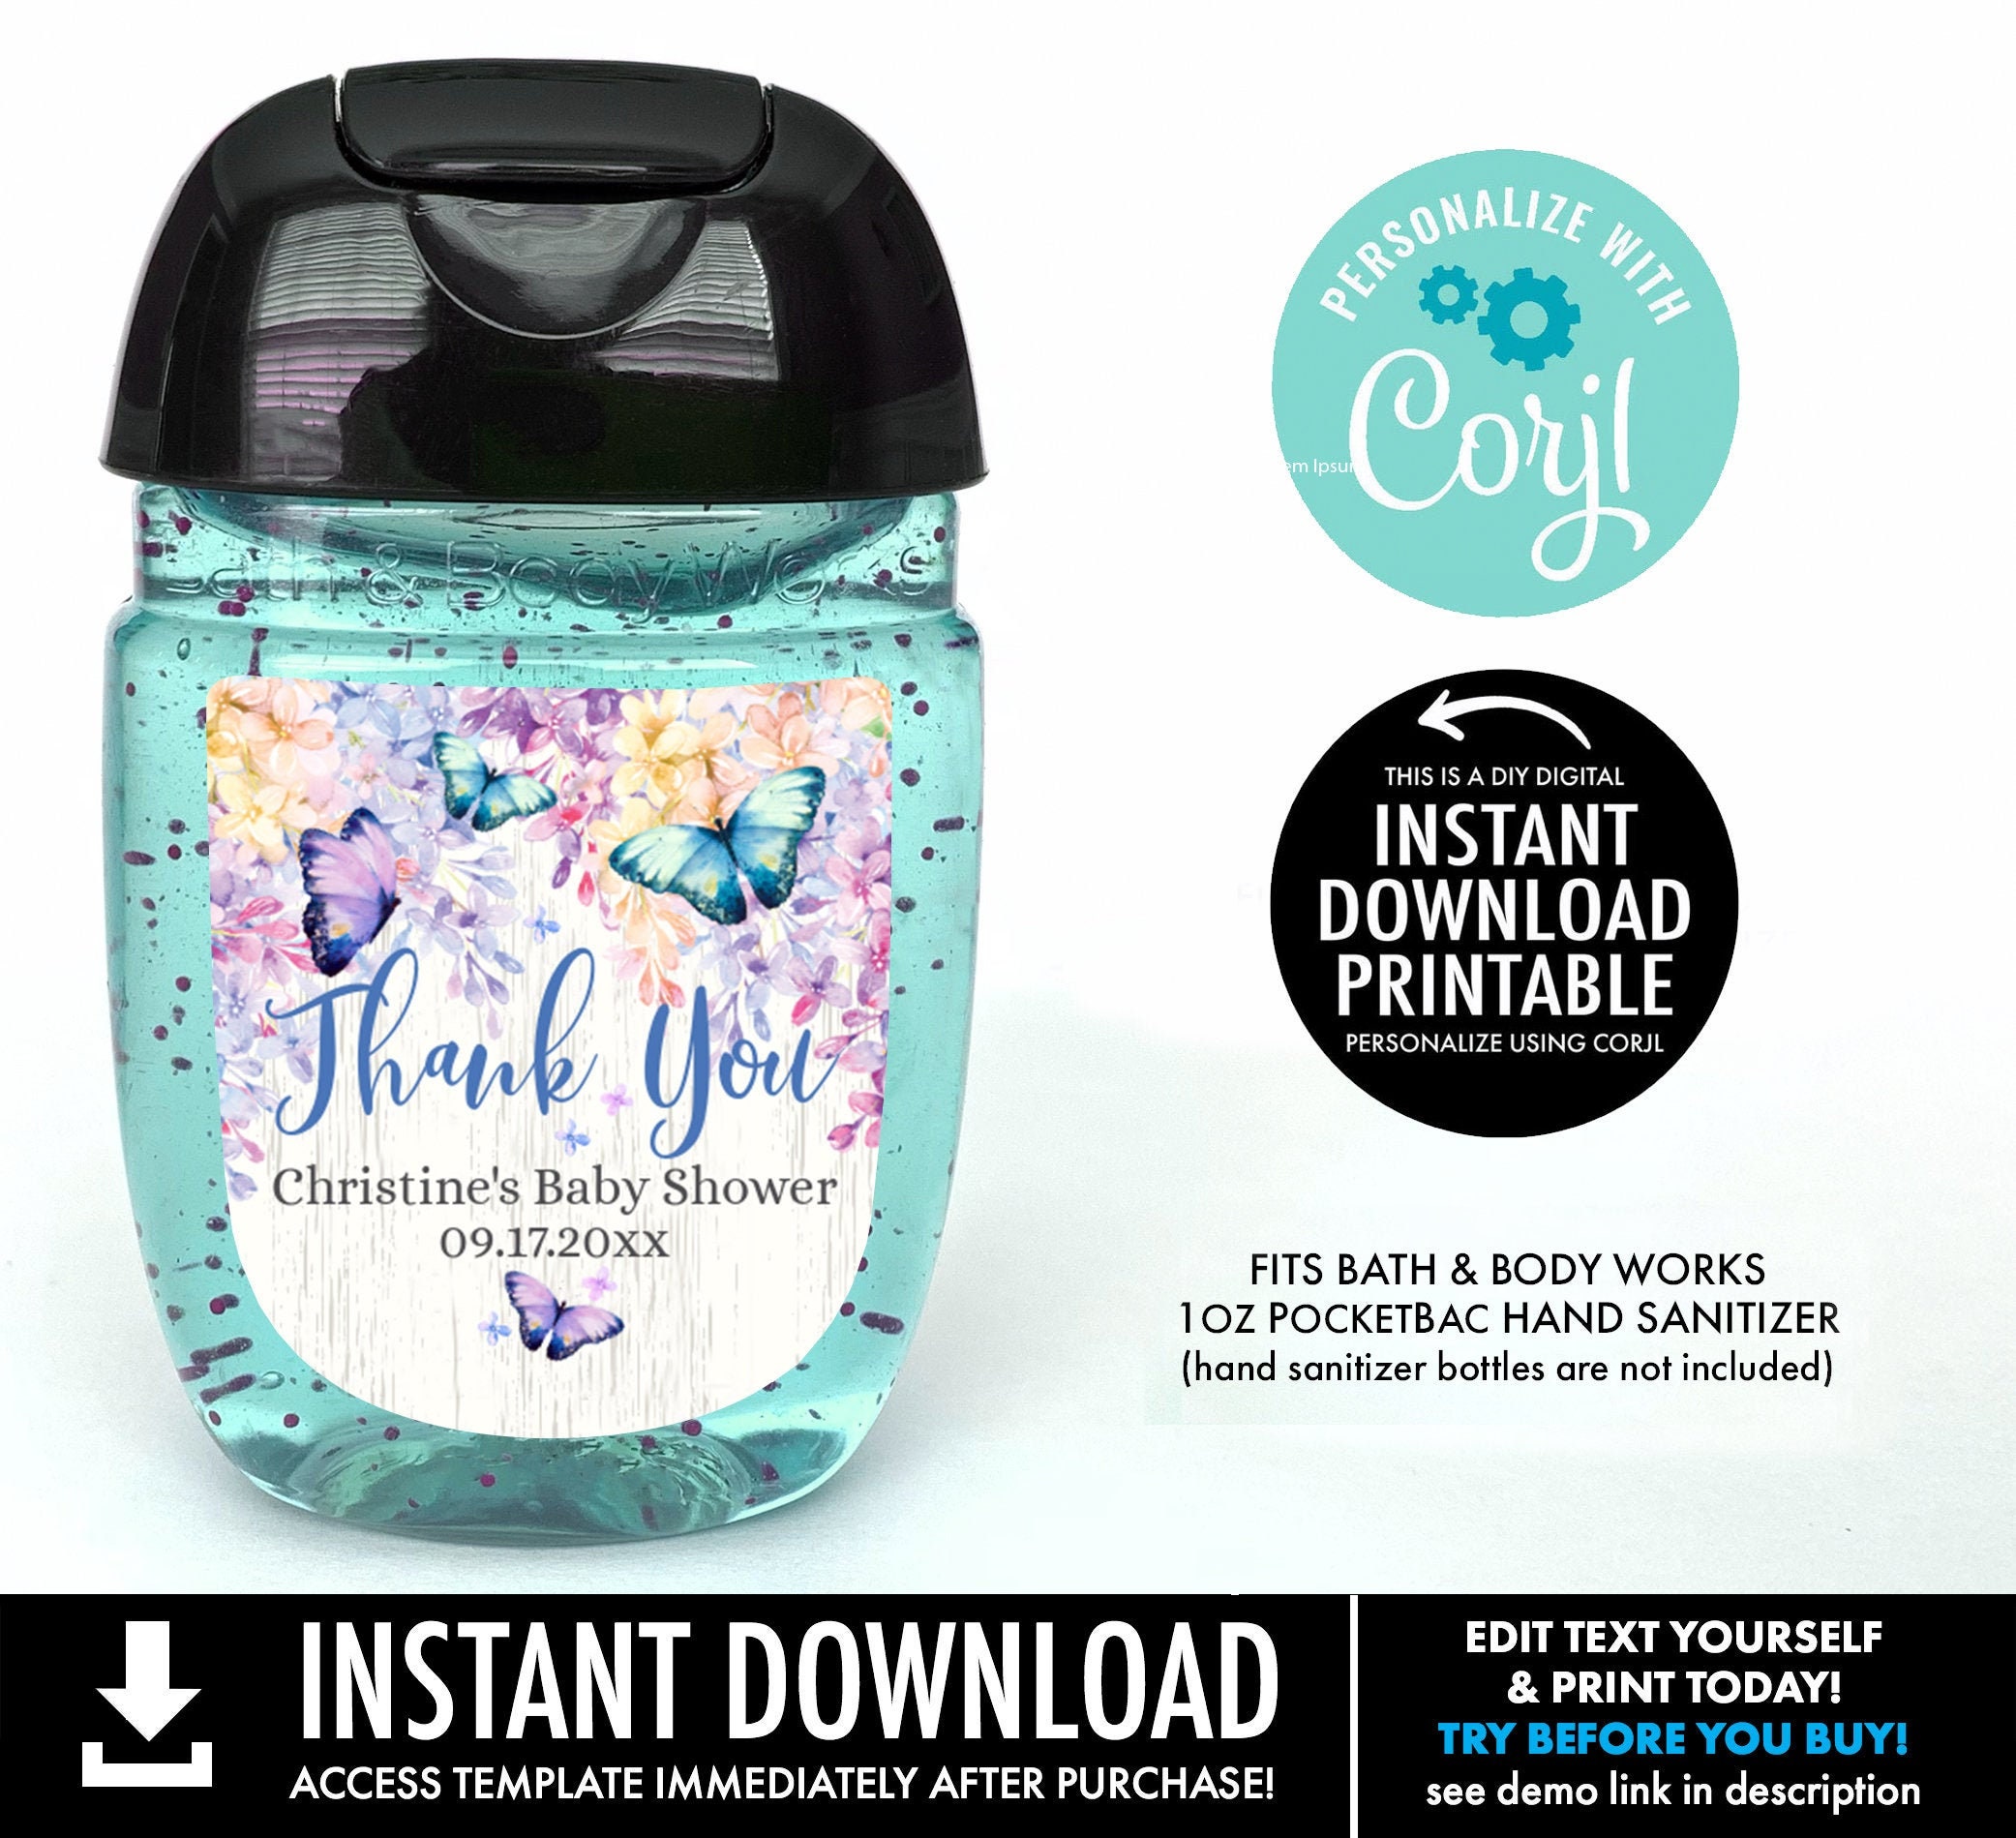 Bath and body works hand gel-watch and download